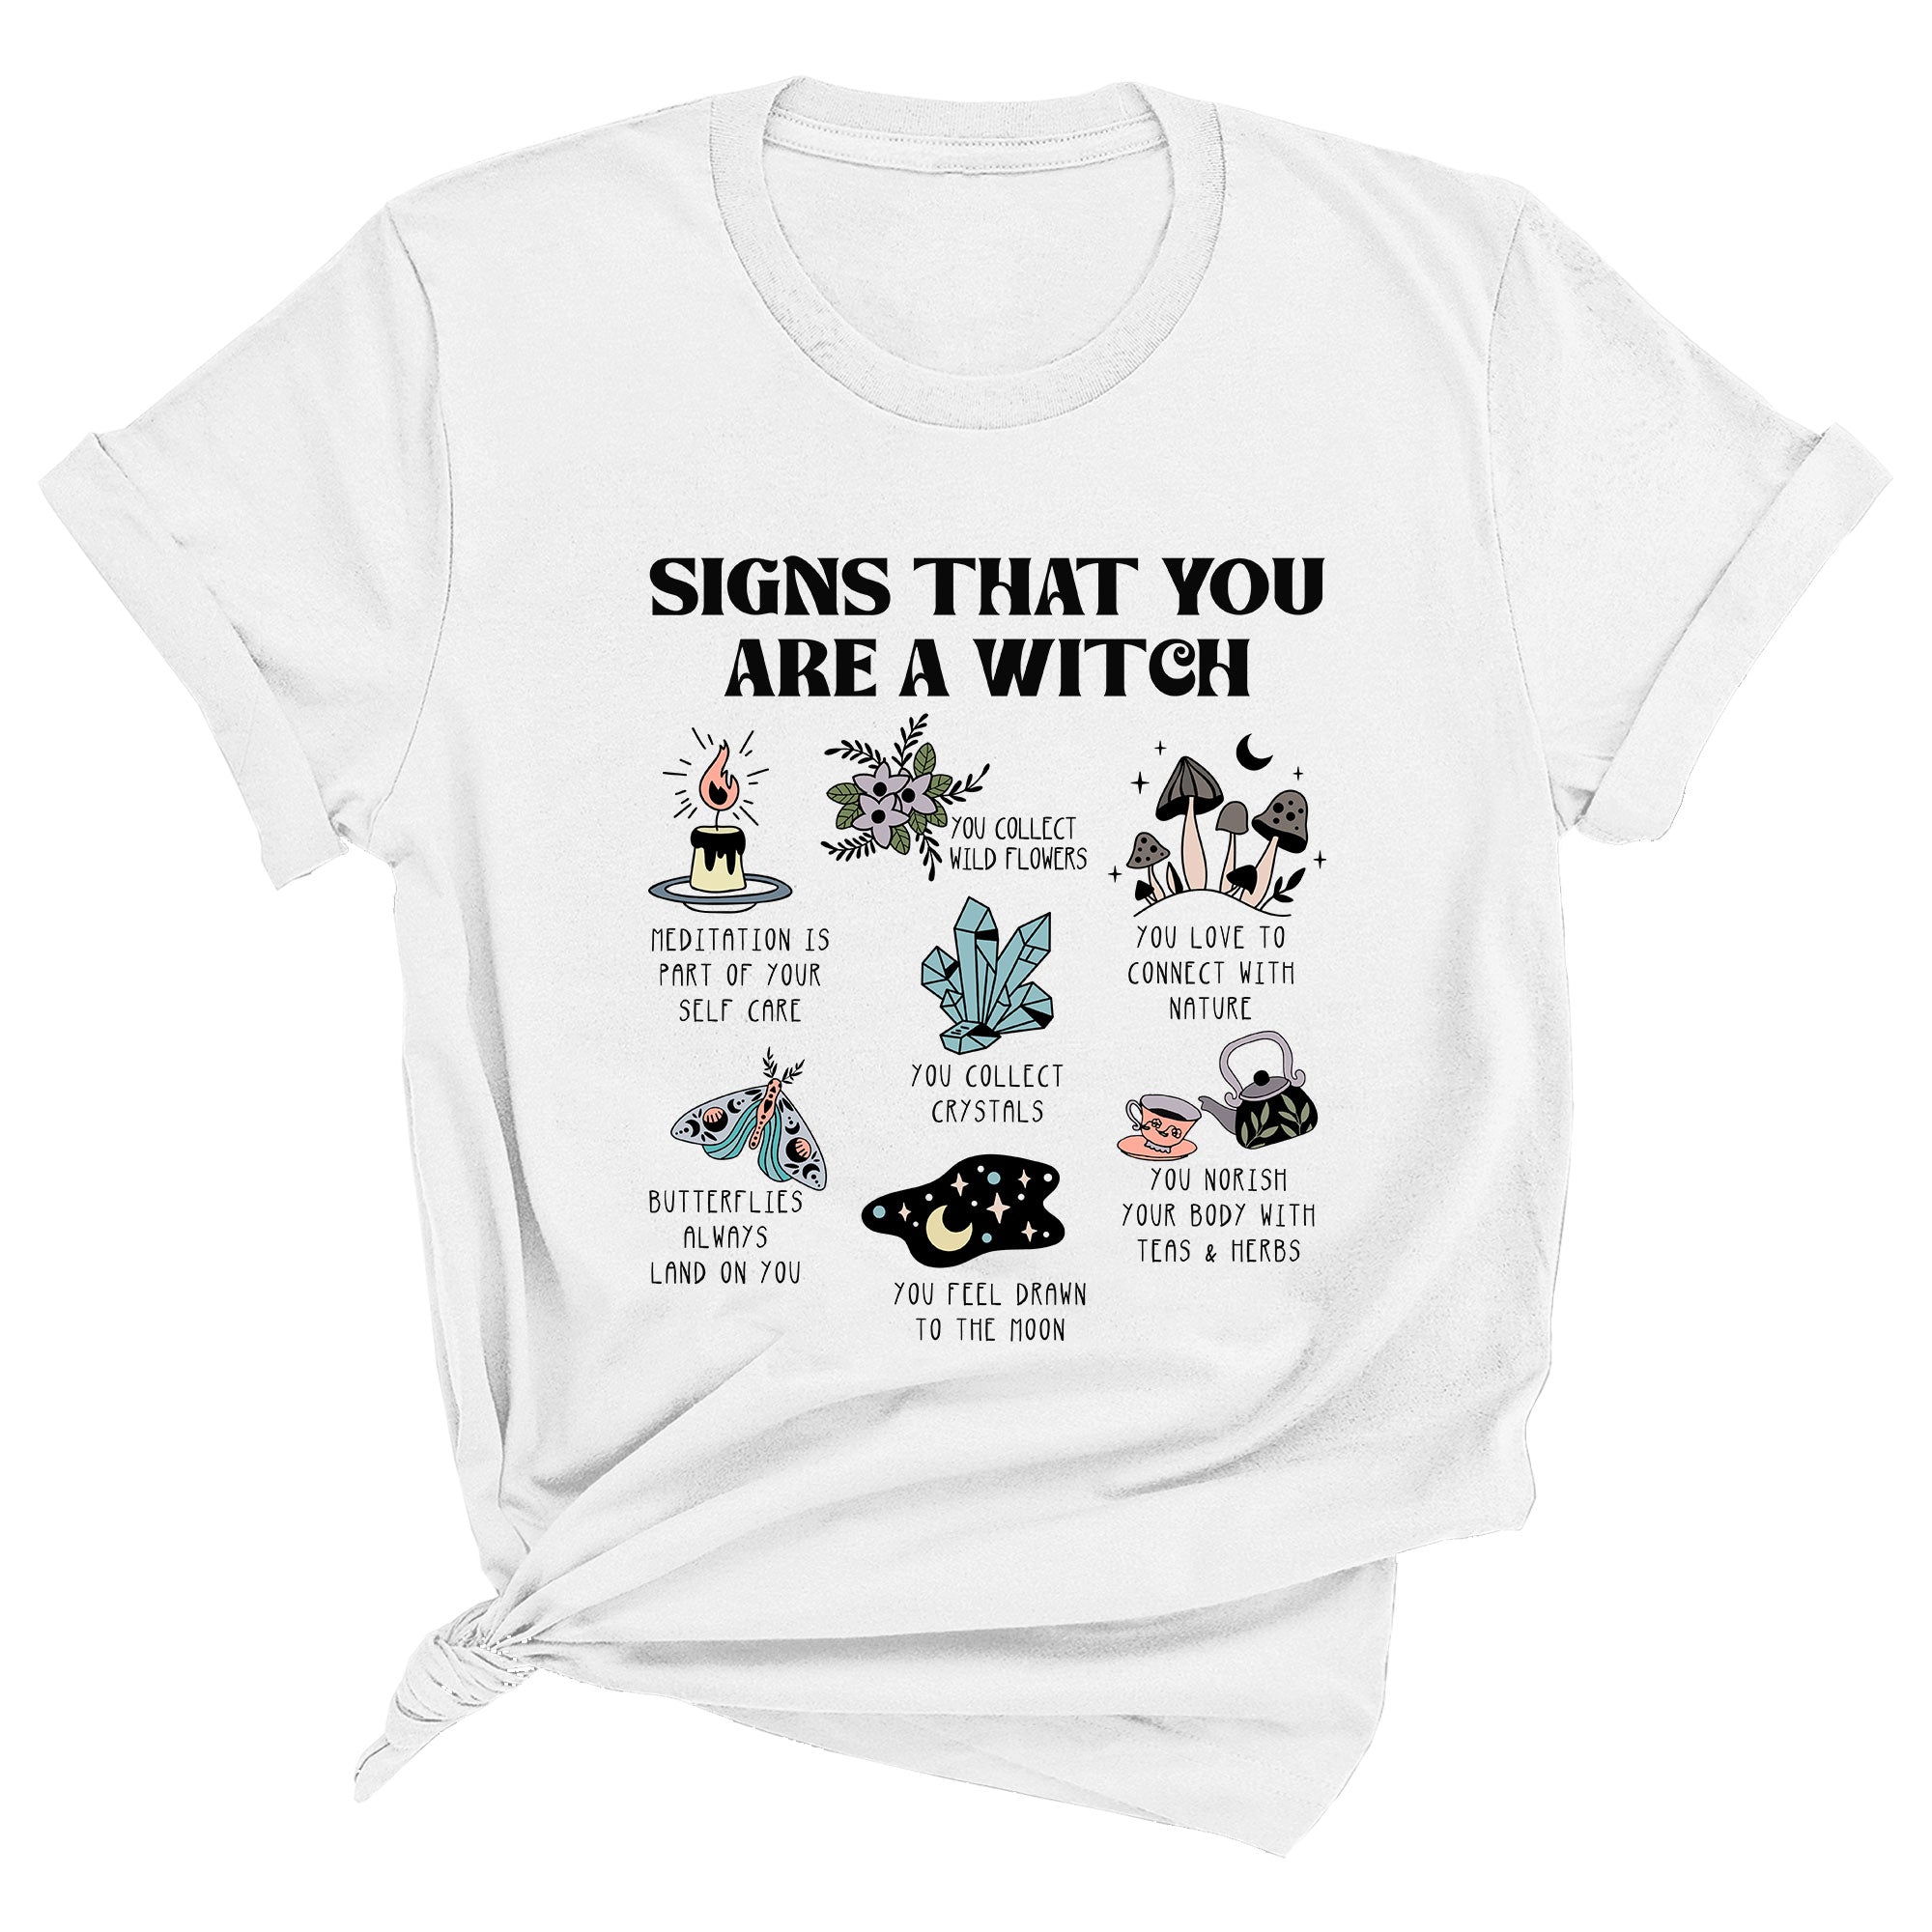 Signs that You are a Witch Premium Unisex T-Shirt